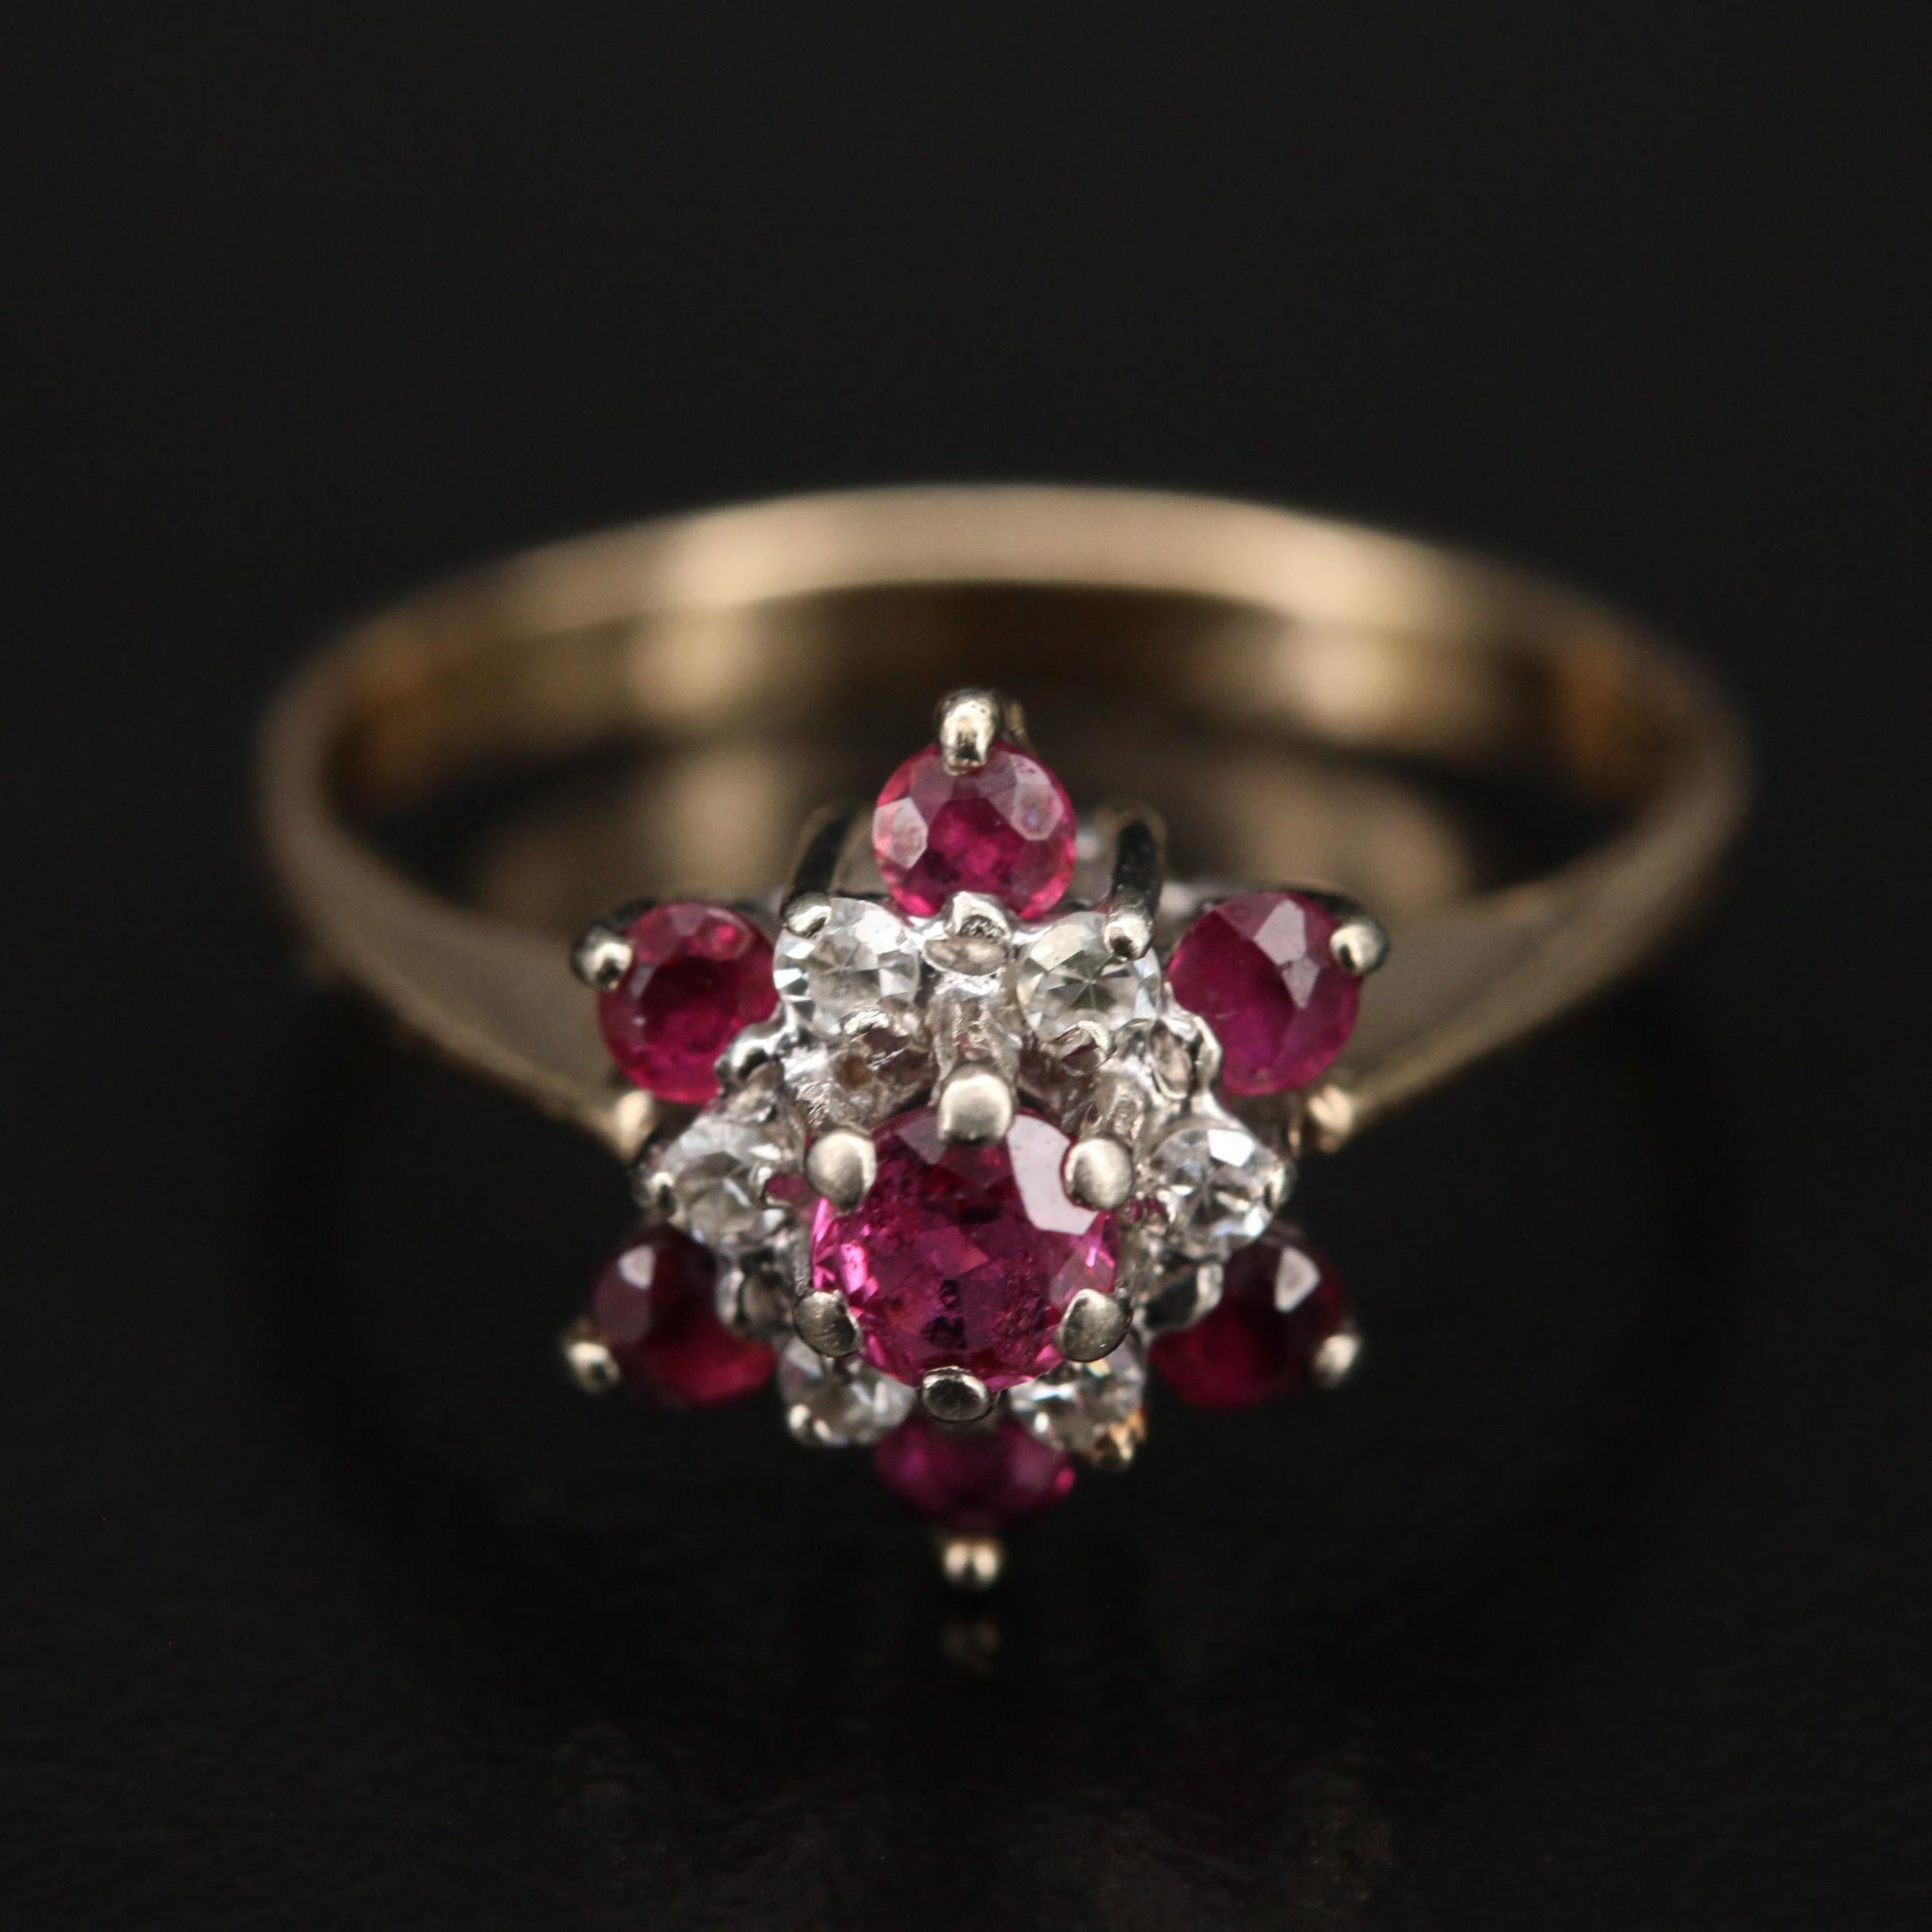 For Sale:  Antique Star Ruby Engagement Ring, Art Deco Floral Ruby Diamond Wedding Ring 2